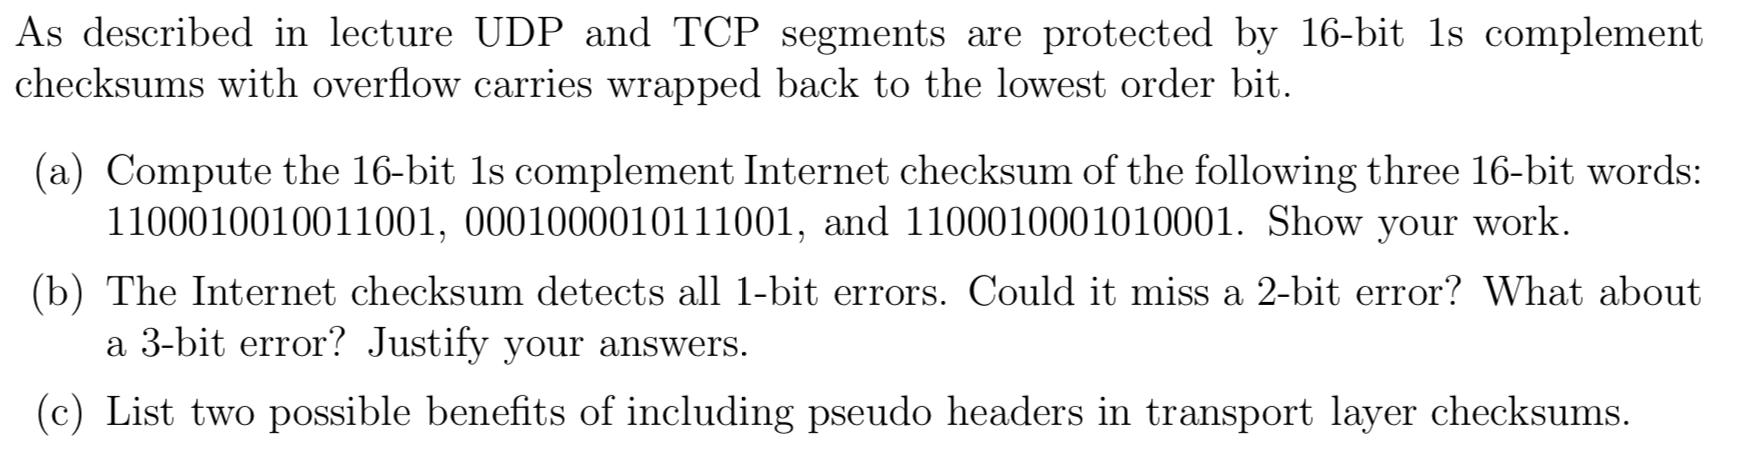 As described in lecture UDP and TCP segments are protected by 16-bit 1s complement checksums with overflow